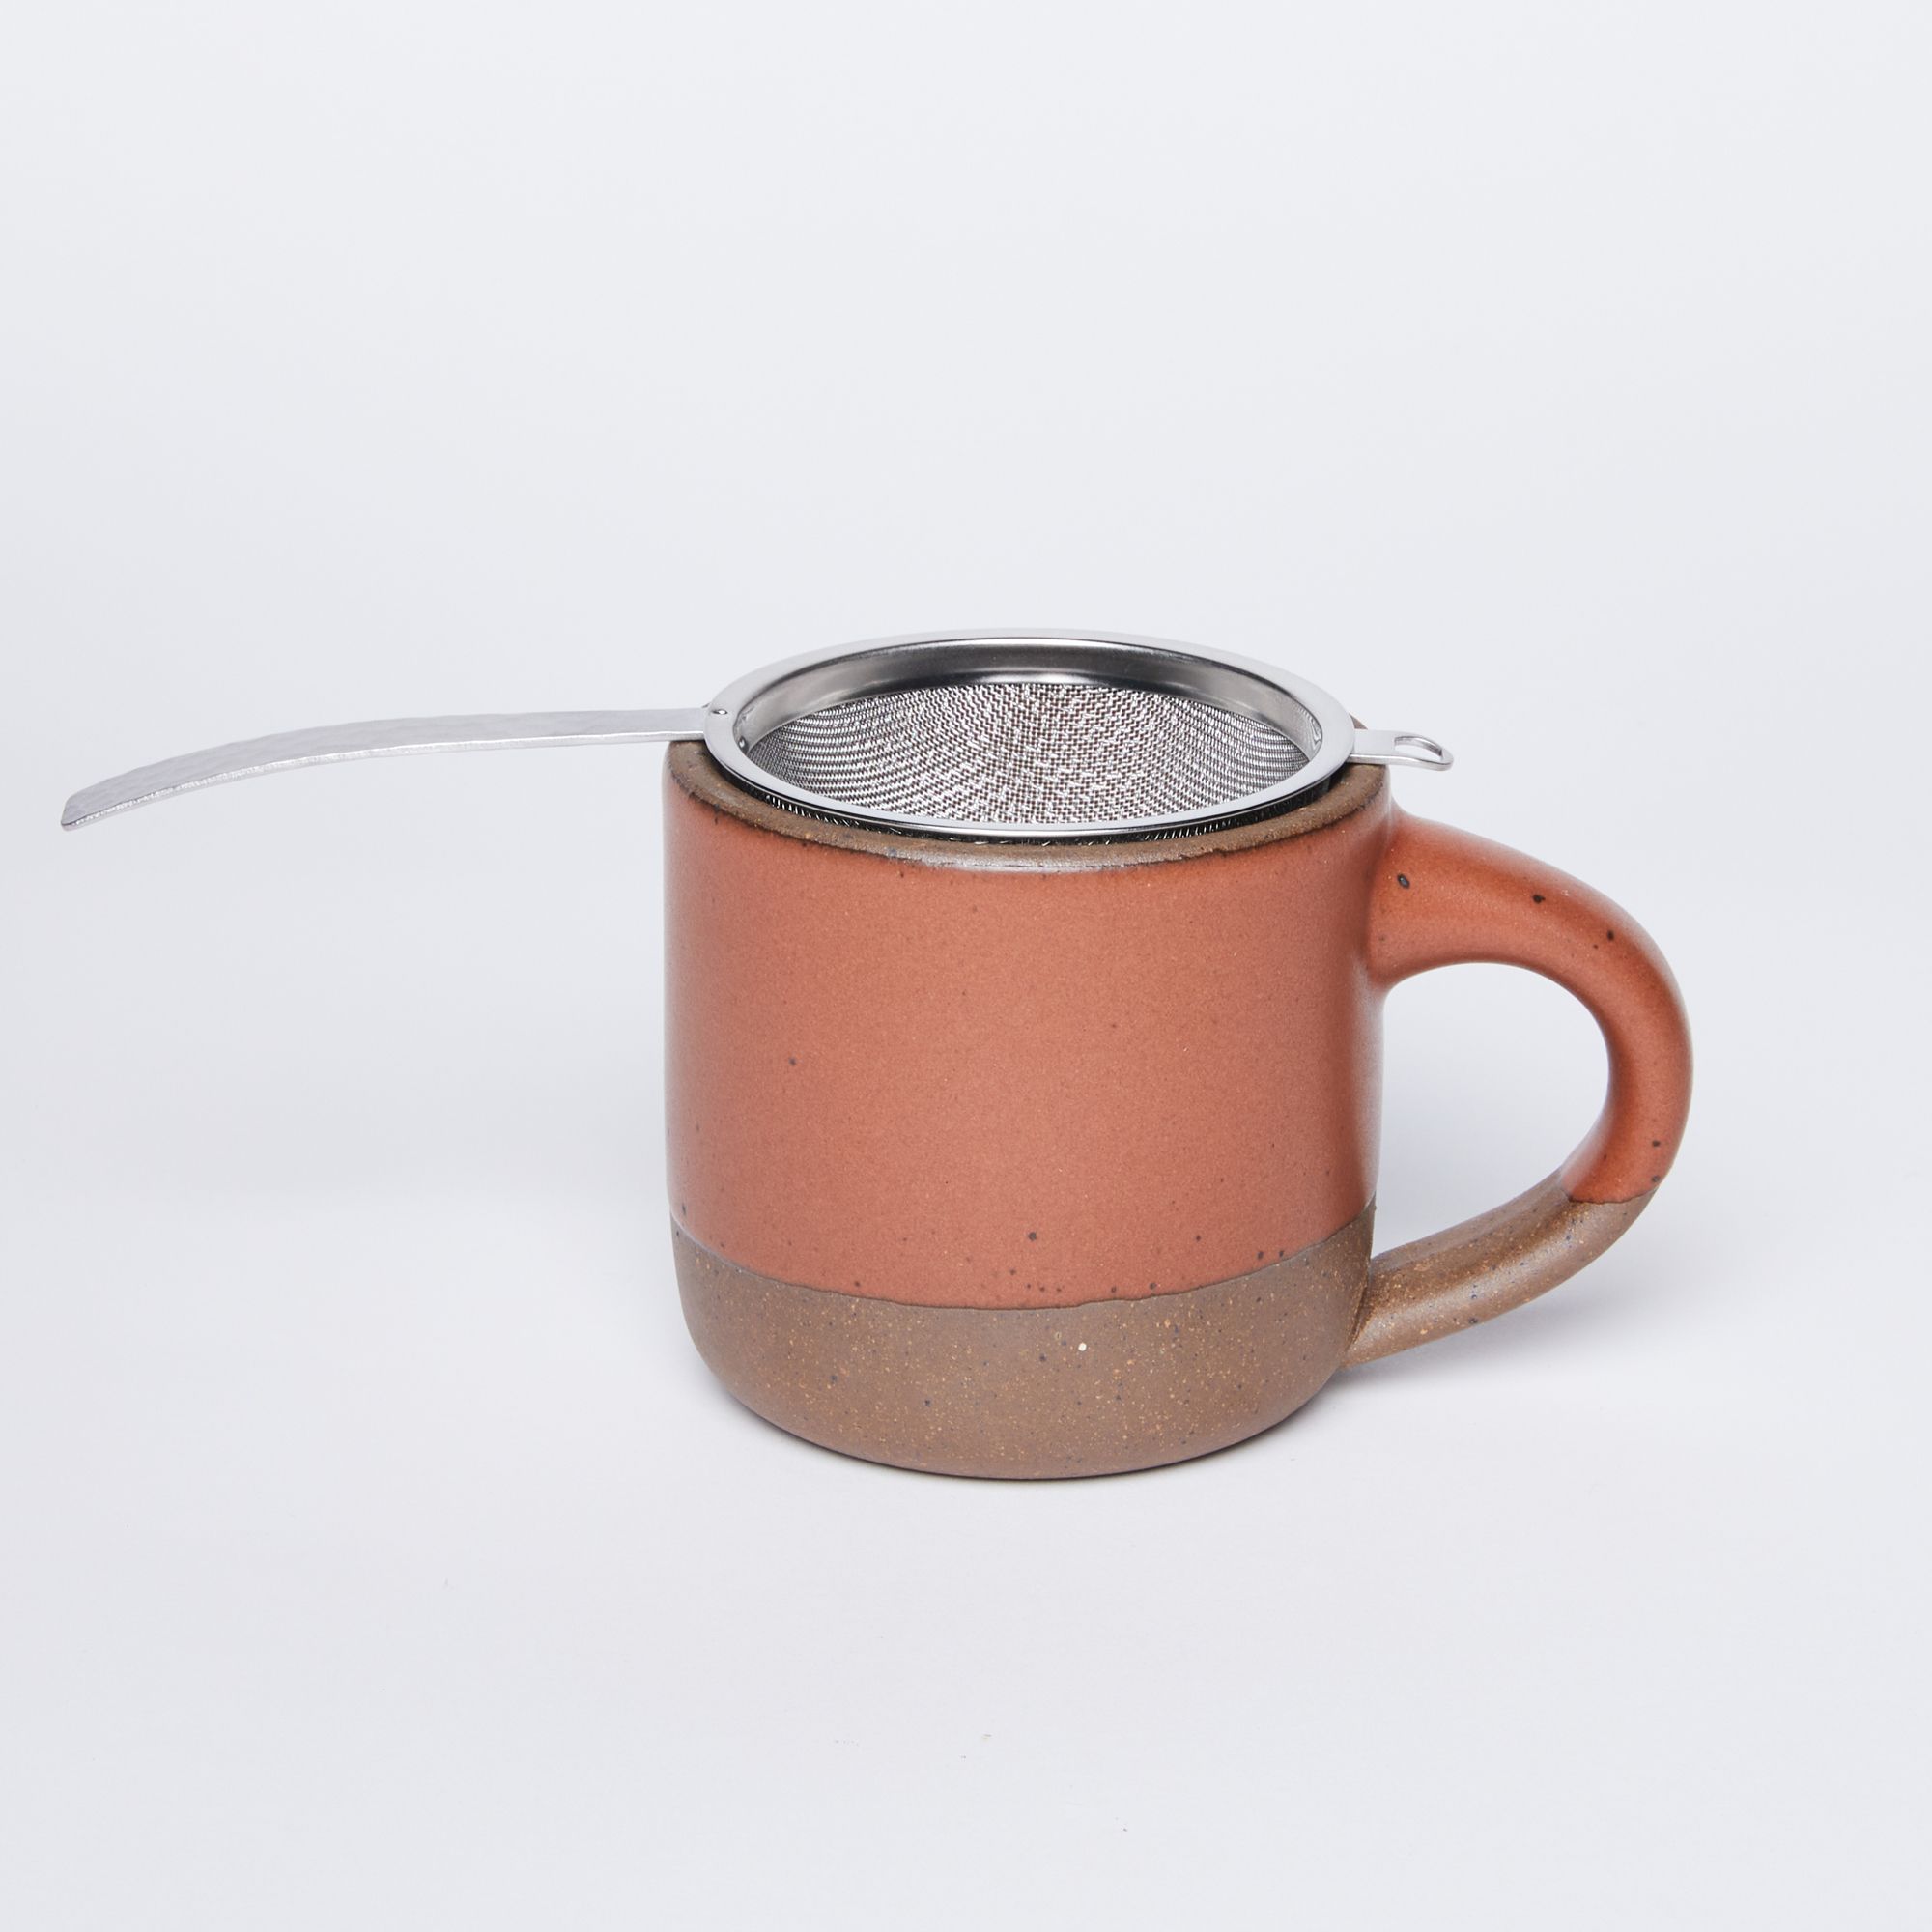 Stainless steel half dome strainer with steel handle on top of opening of The Small Mug in Amaro